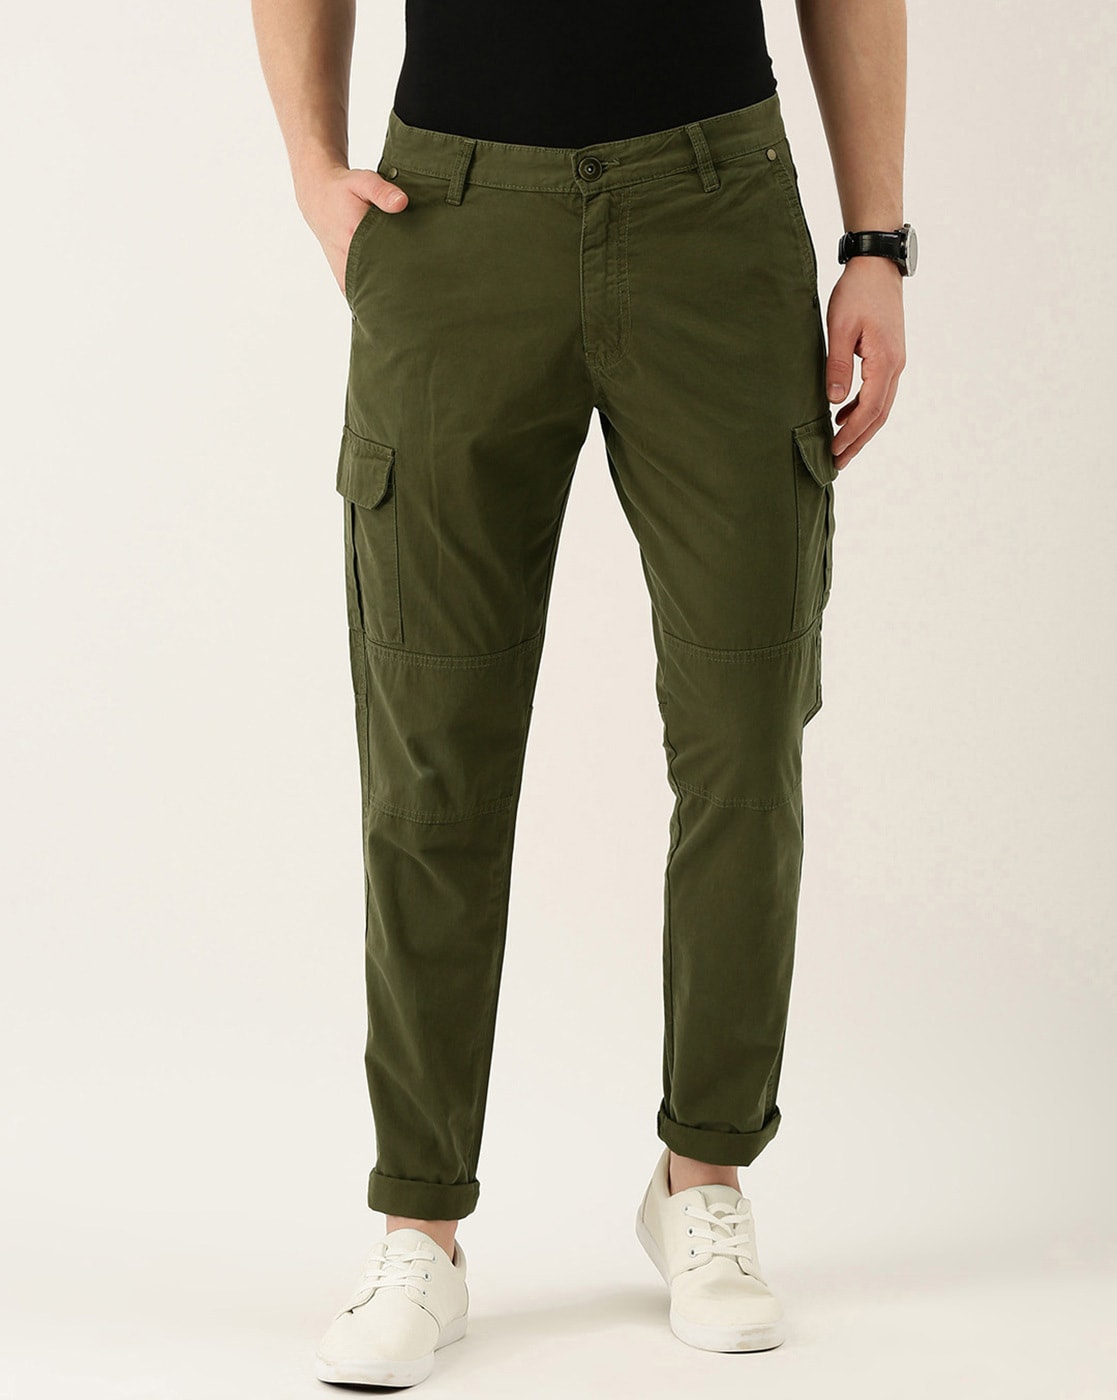 Arriba 73+ imagen olive green cargo pants outfit mens - Abzlocal.mx